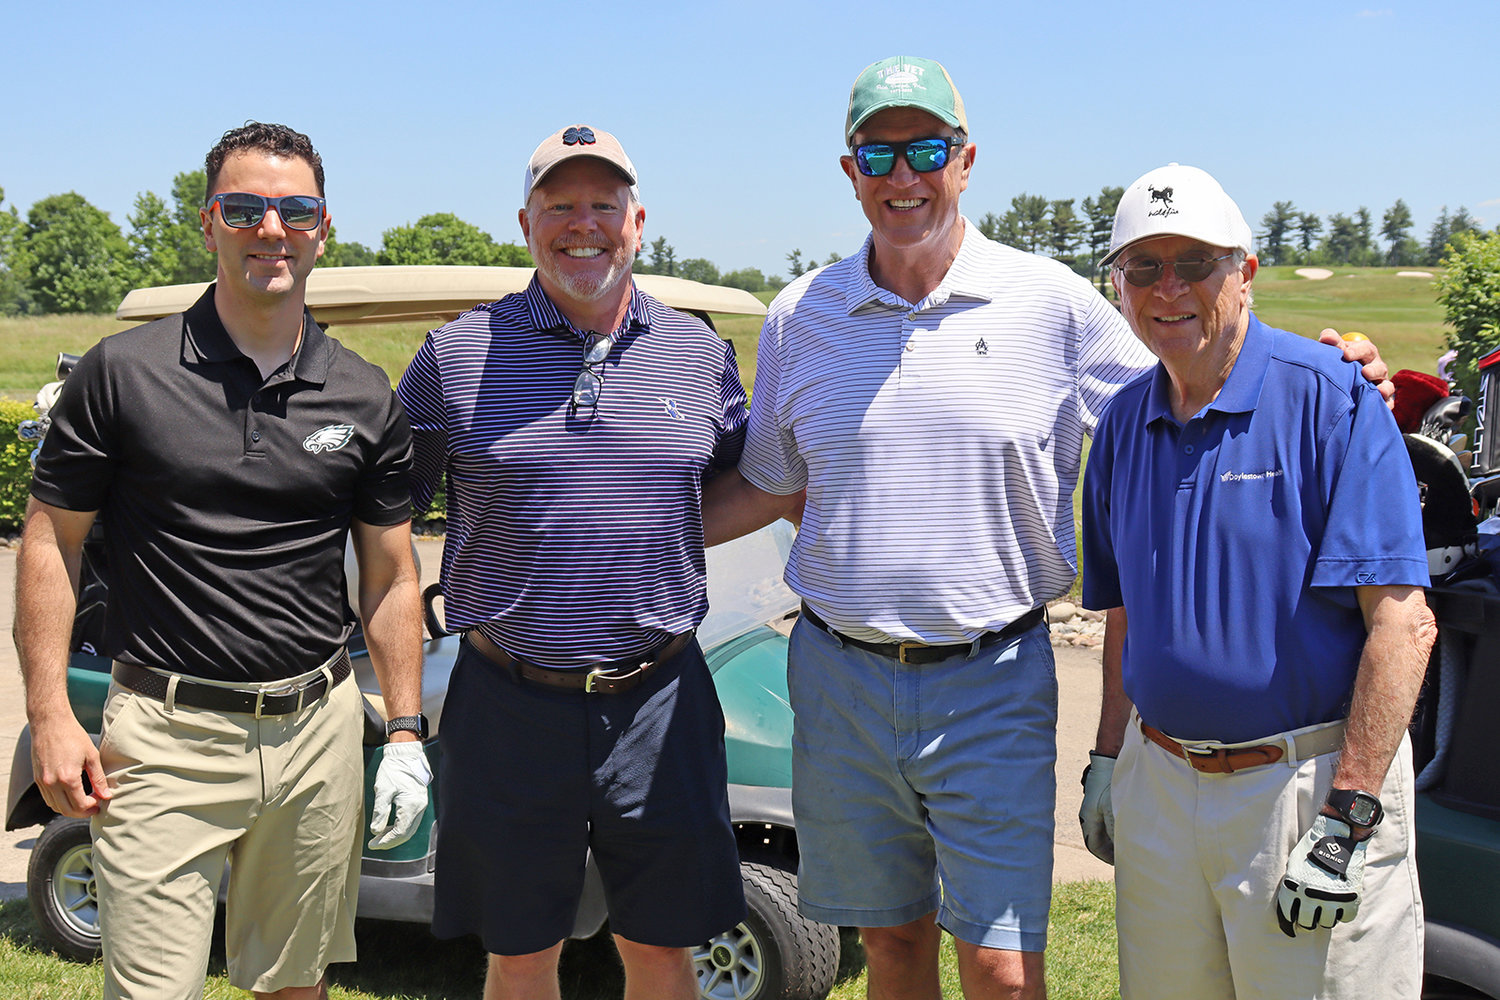 Nathan Hawkins, Tim Kelly, Joe Conwell and Marvin Woodall in the foursome for The Norwood Company Inc., one of the Golf Classic event sponsors.